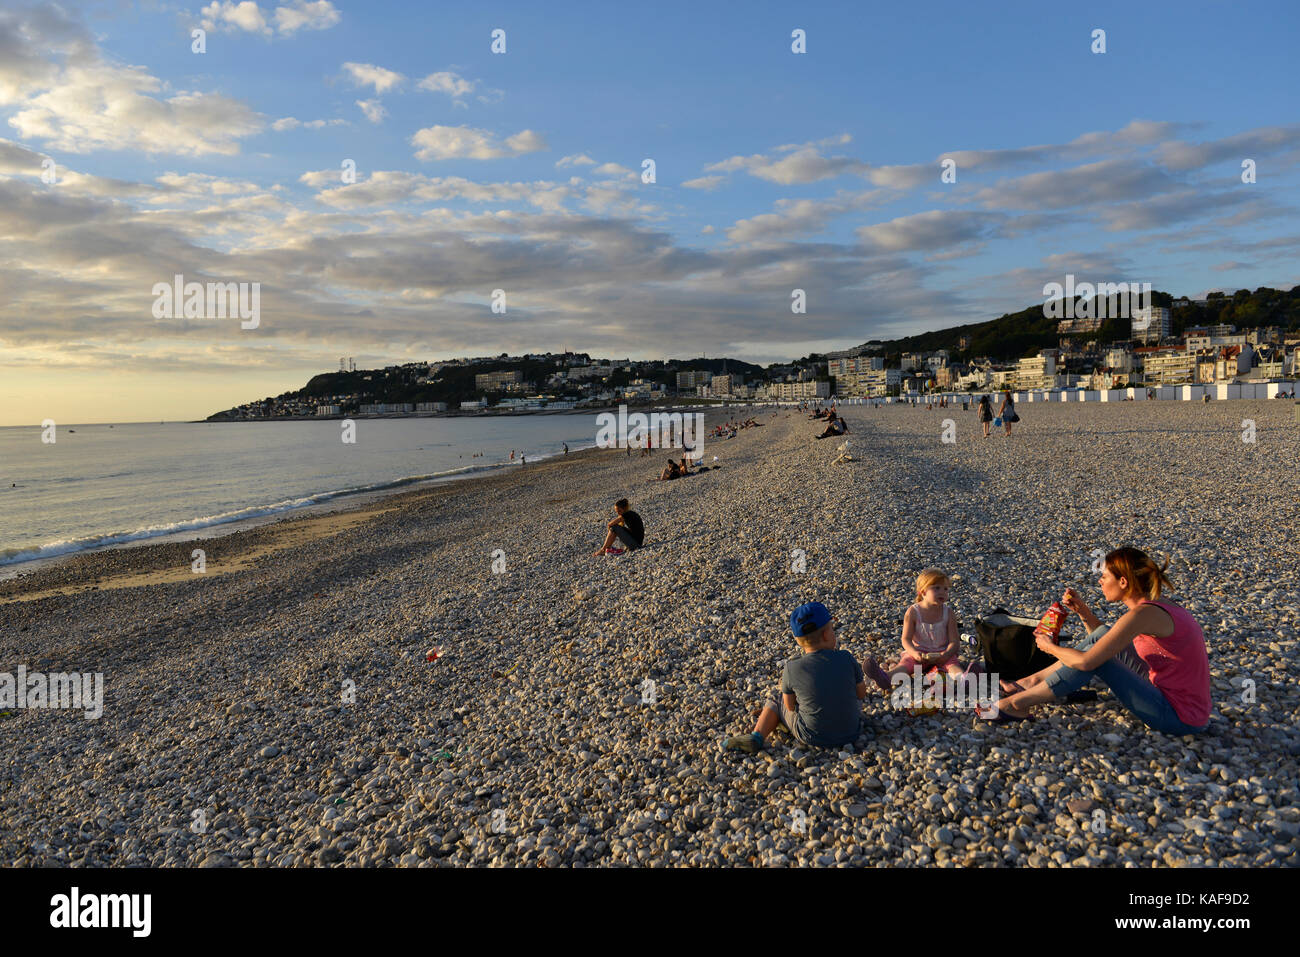 Le Havre (Normandy region, north western France): families on the pebble beach enjoying the sunset Stock Photo